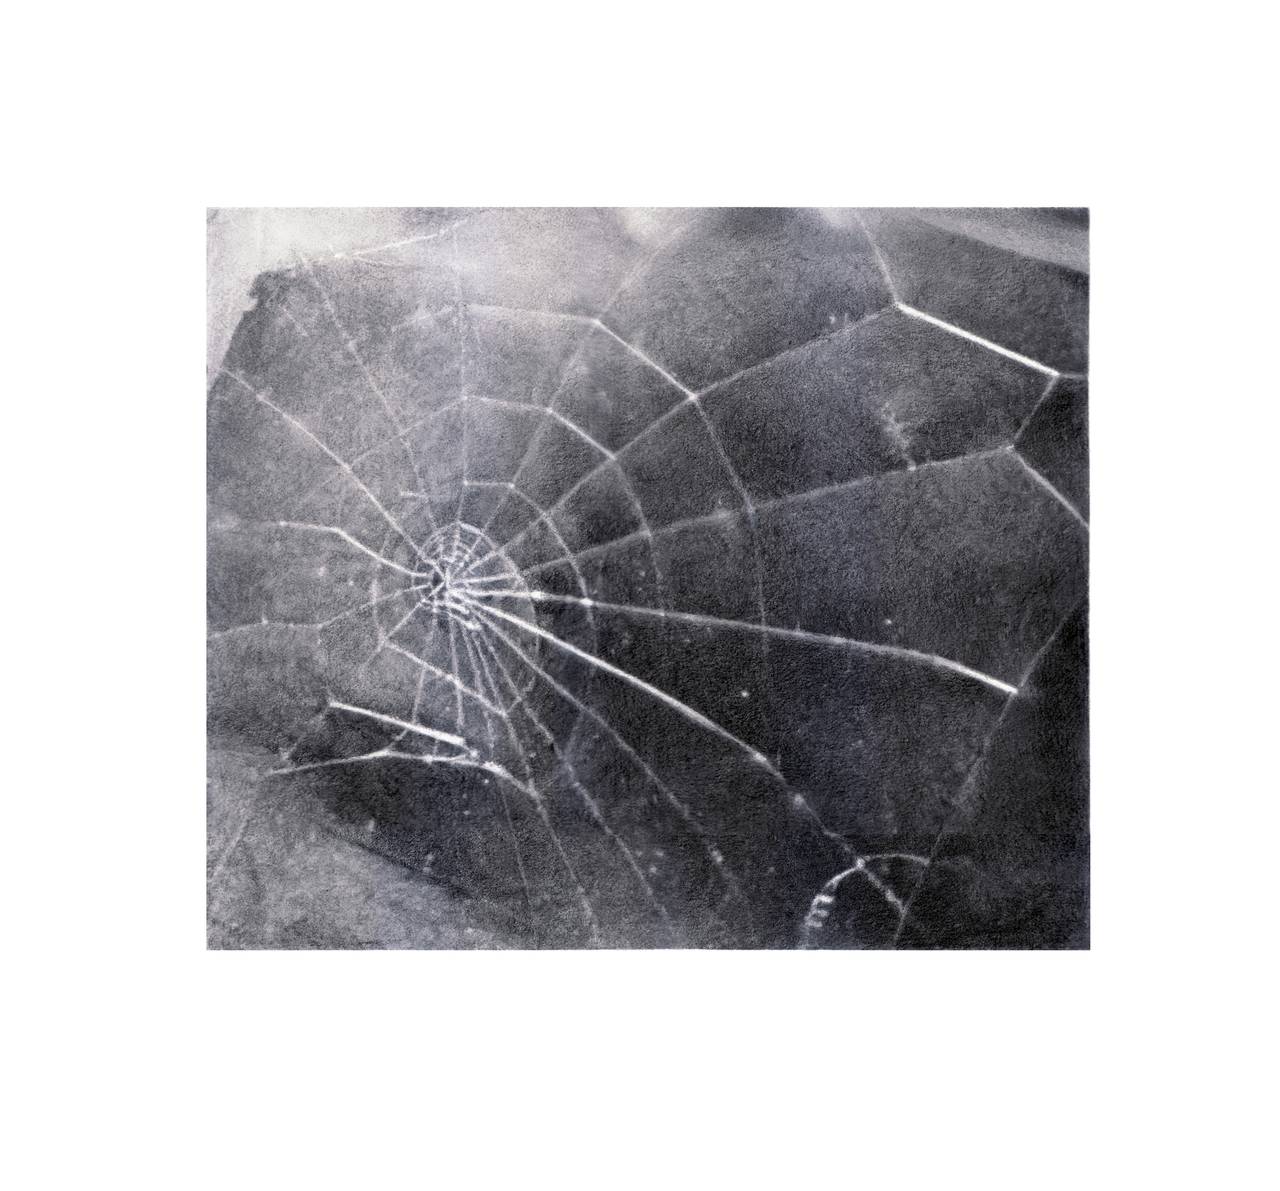 This screen print depicts one of Celmins' signature subjects, the spider web, which she has represented in various media, including charcoal, oil paint, and multiple printmaking techniques.

One screenprint on wove paper by Vija Celmins, 2009,